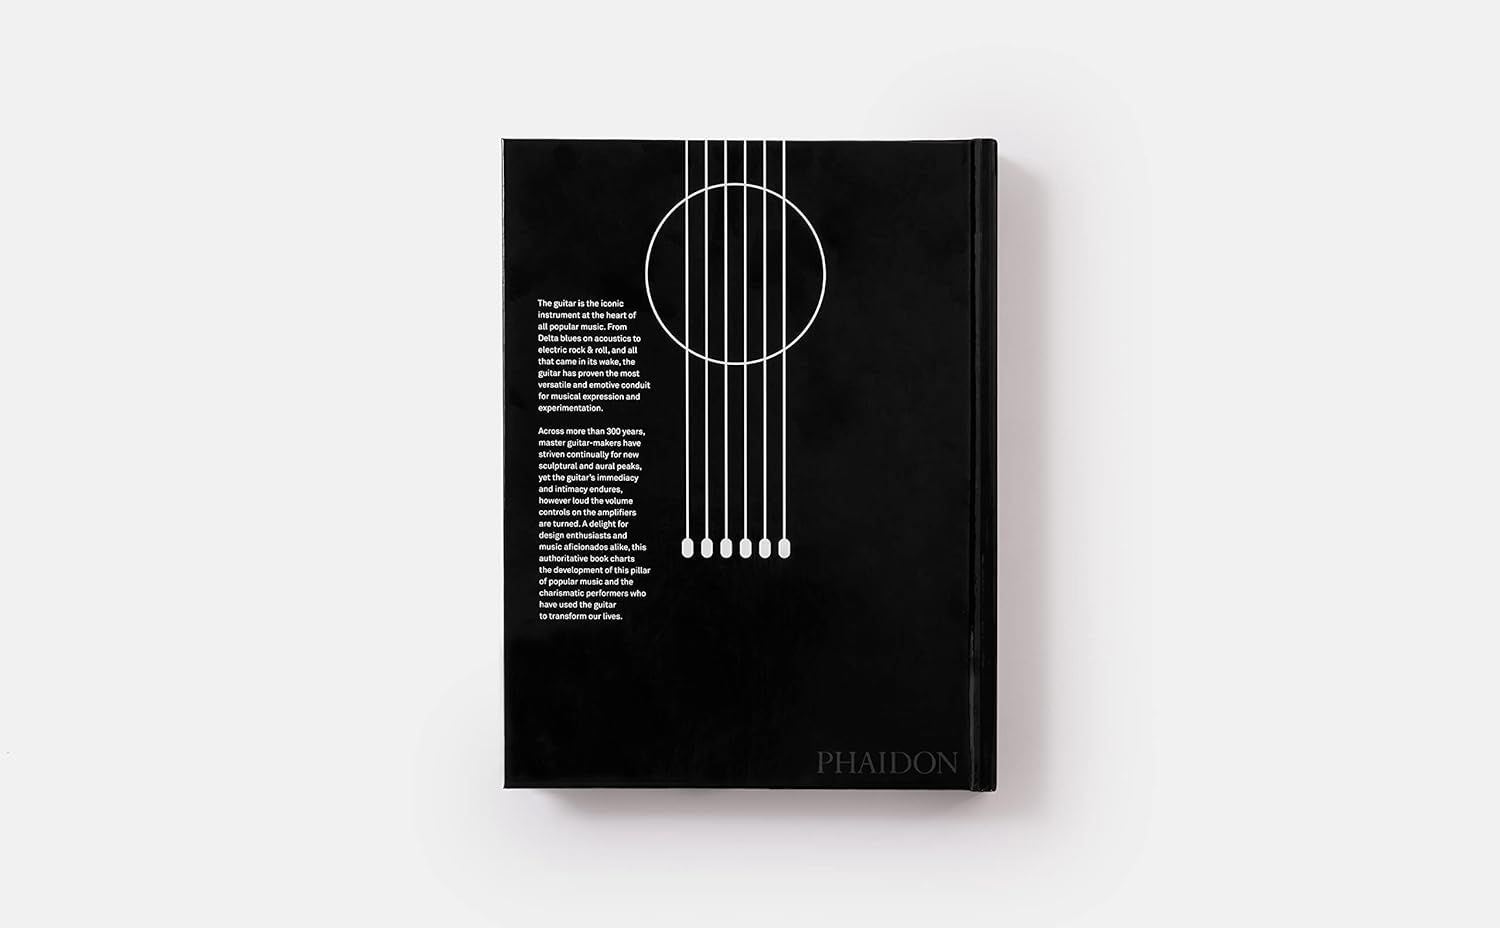  Guitar: The Shape of Sound (100 Iconic Designs) 